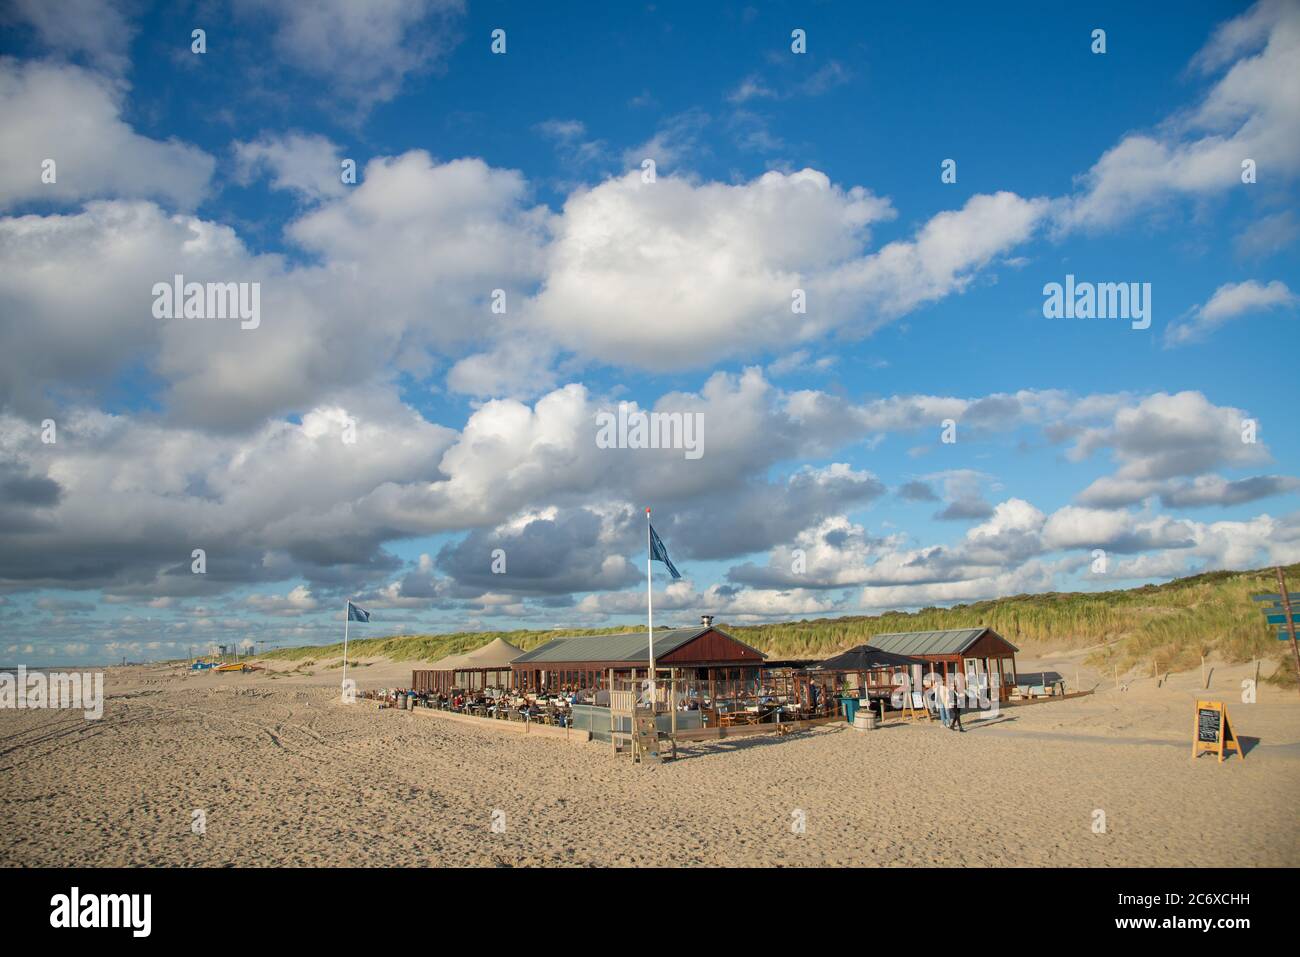 view of beach with beach restaurant in Den Haag, Holland Stock Photo